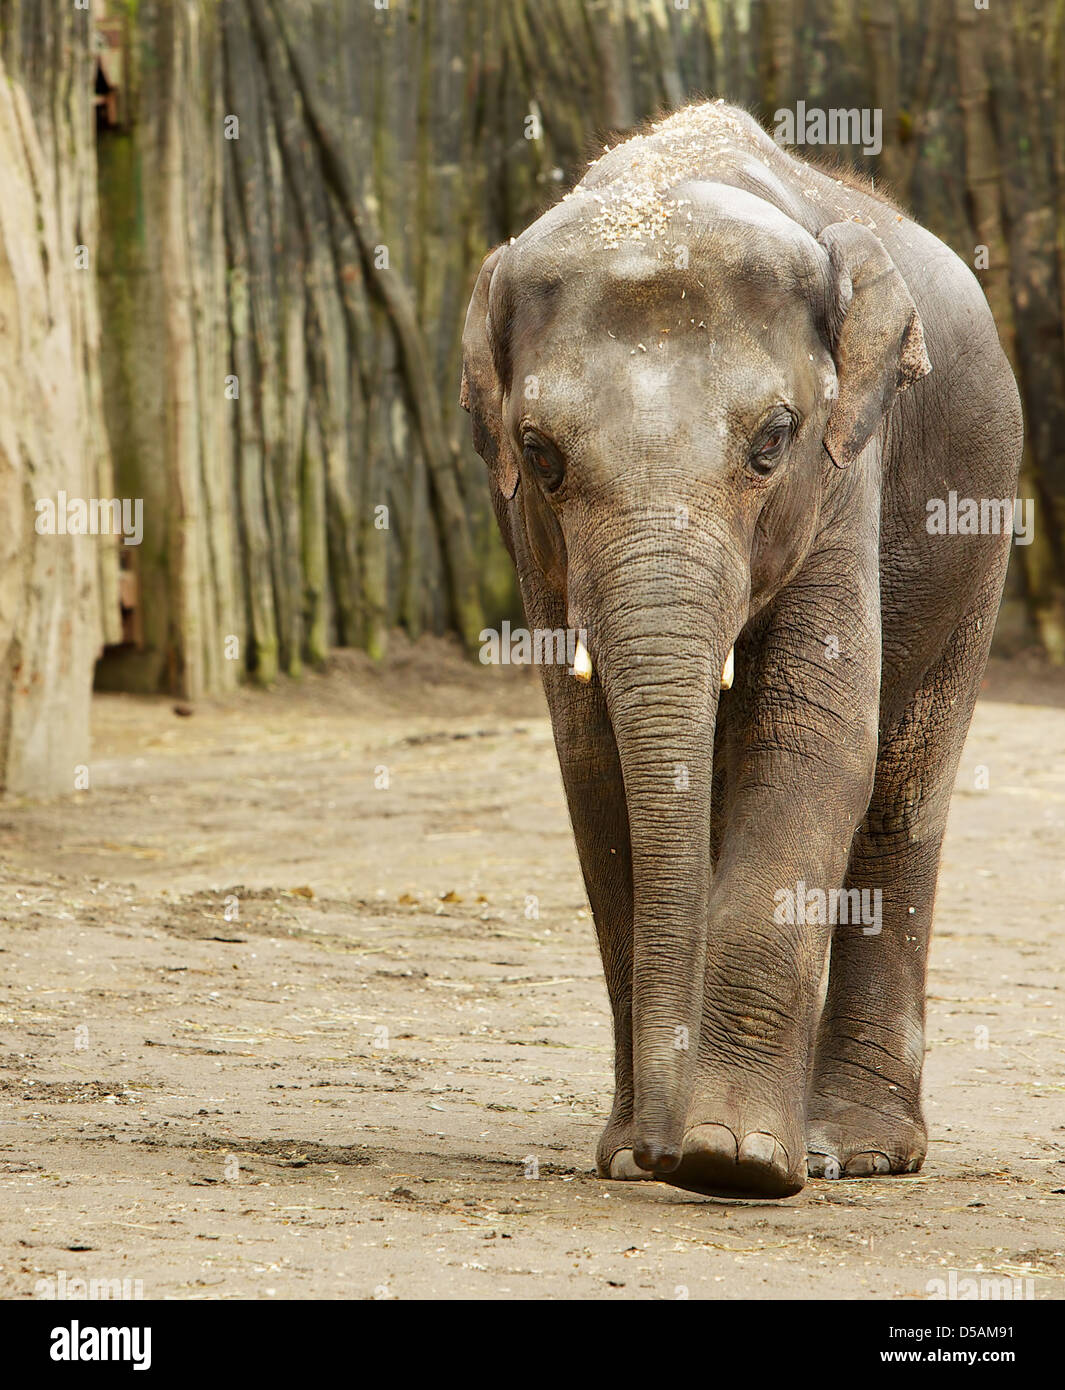 Adult Elephant walking towards camera with wood wall in background Stock Photo